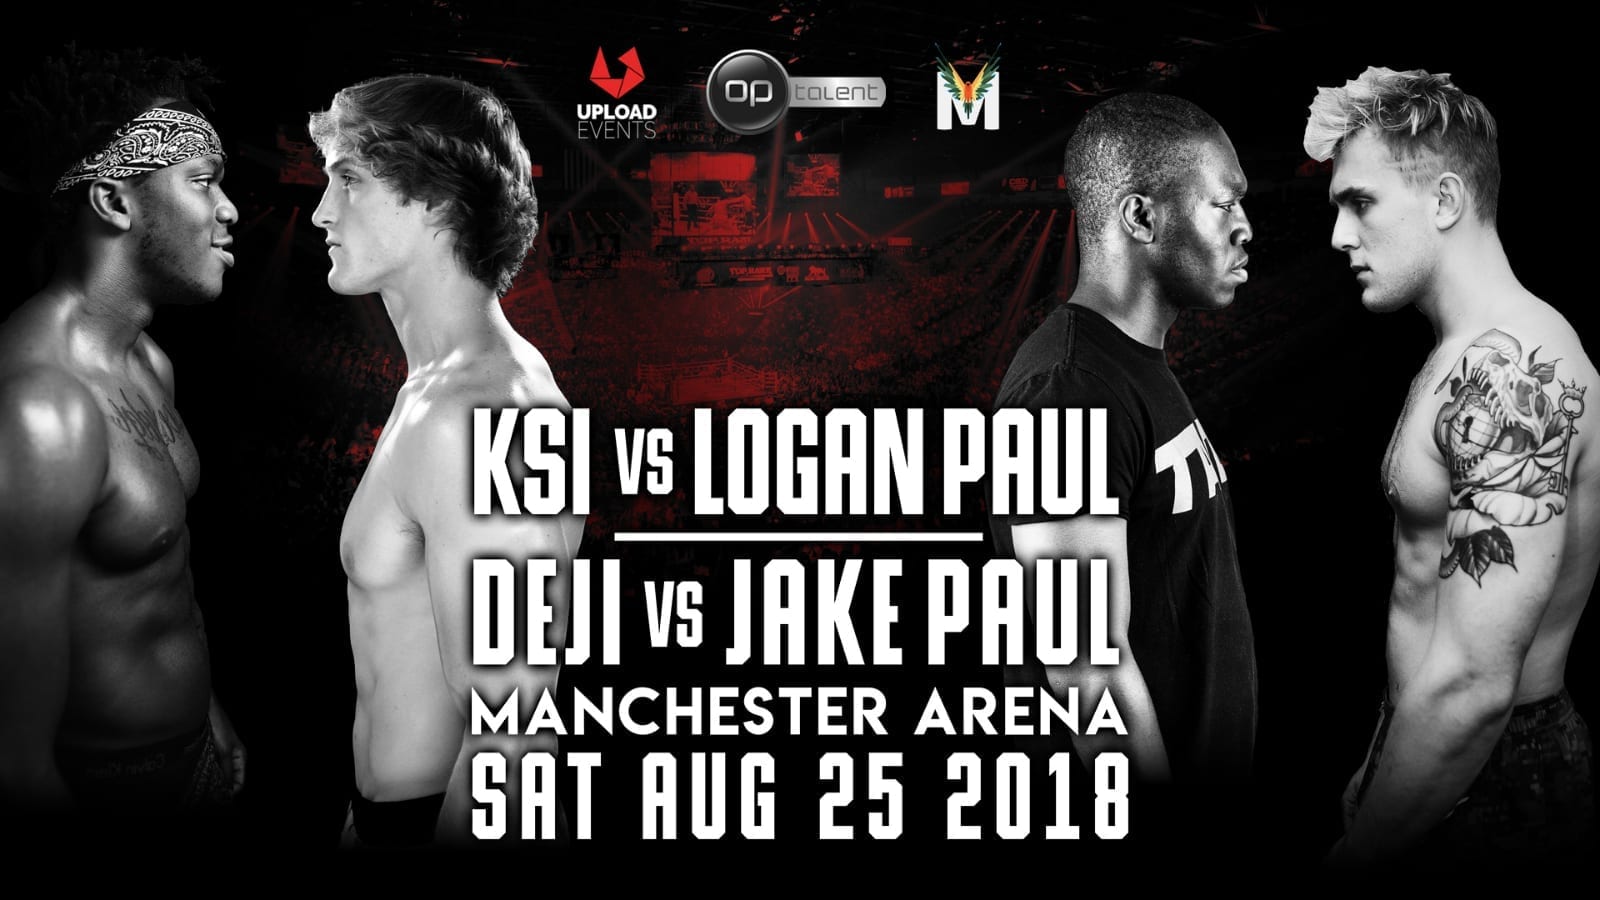 KSI vs Logan Paul The YouTube boxing match the internet is going crazy over